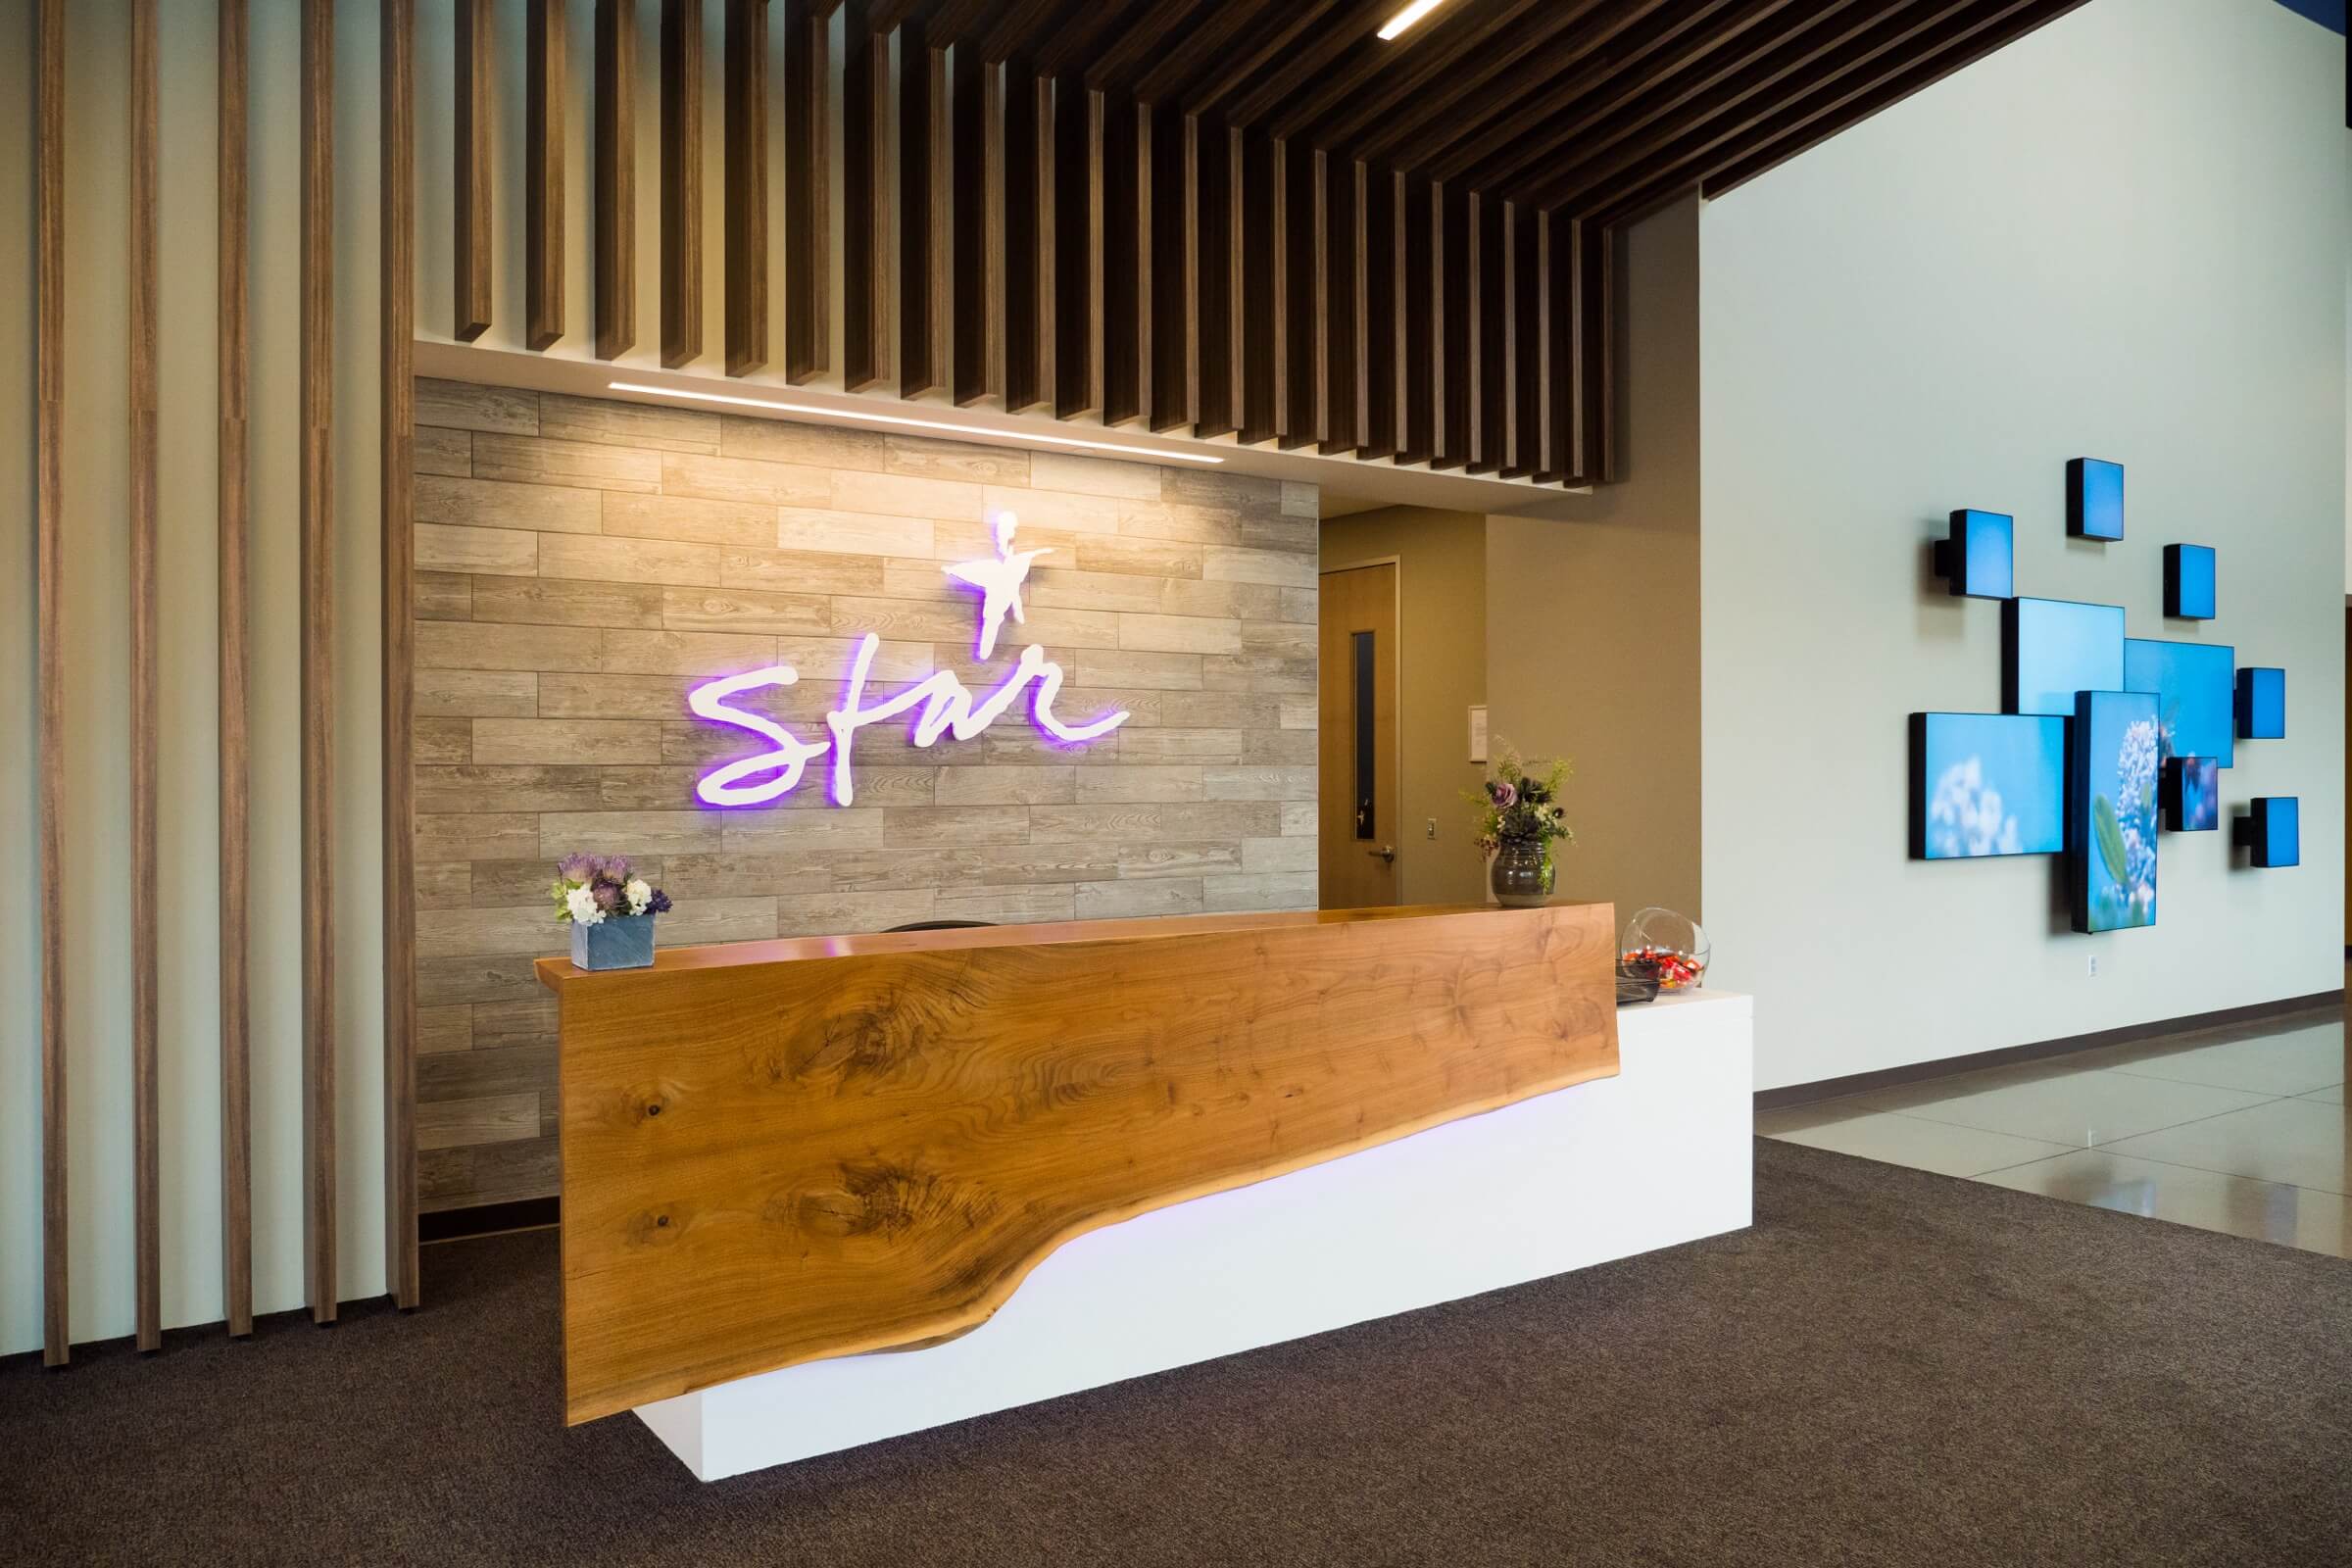 The entry area and reception desk of STAR's lobby